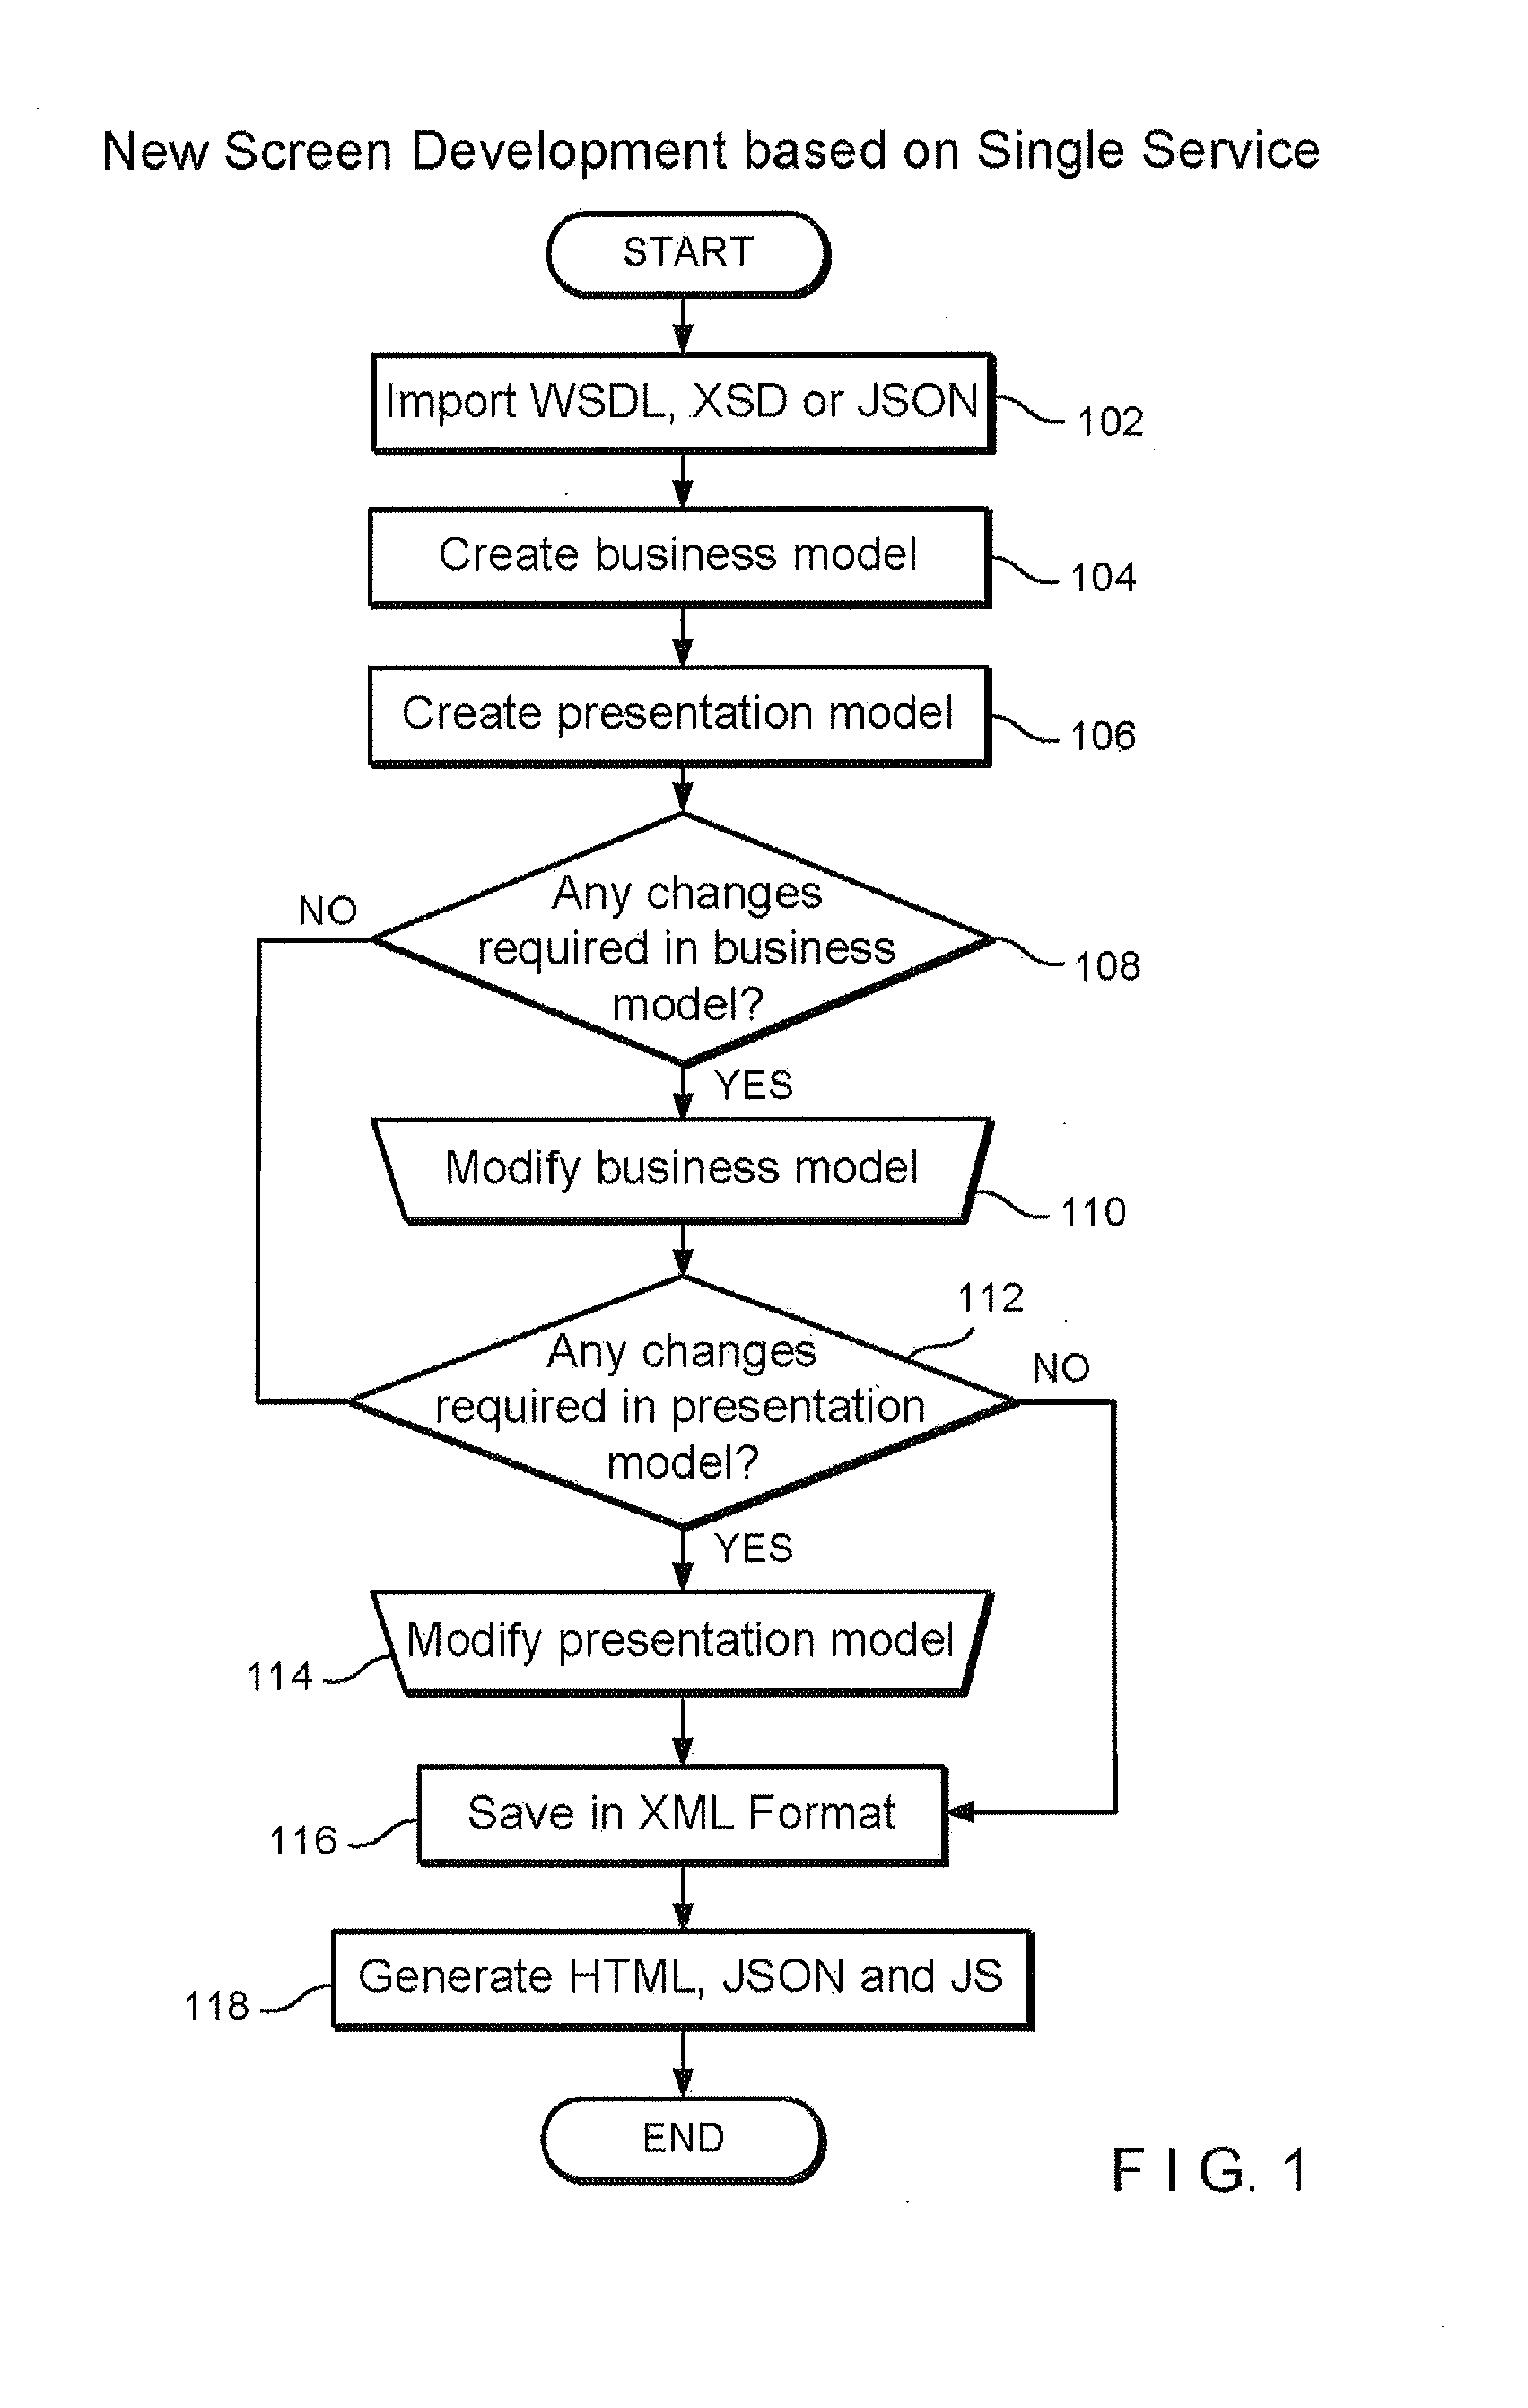 Method, system, and program for automatic generation of screens for mobile apps based on back-end services